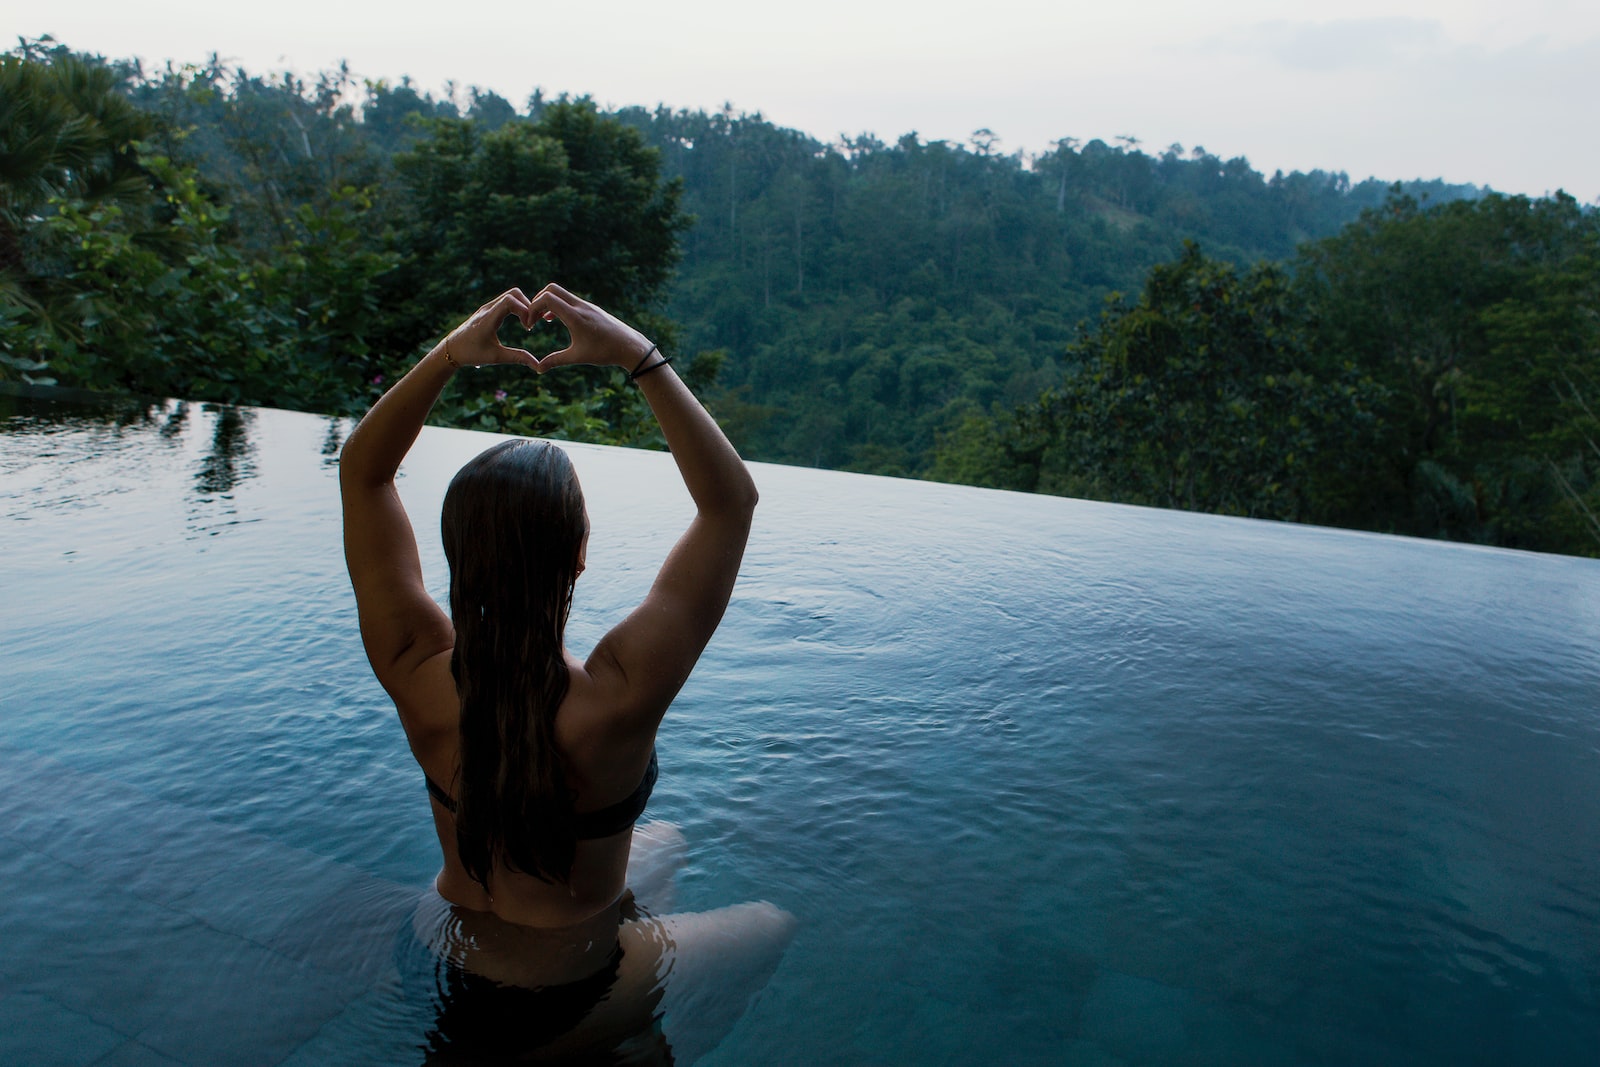 woman in infinity pool making heart hand gesture facing green leafed trees